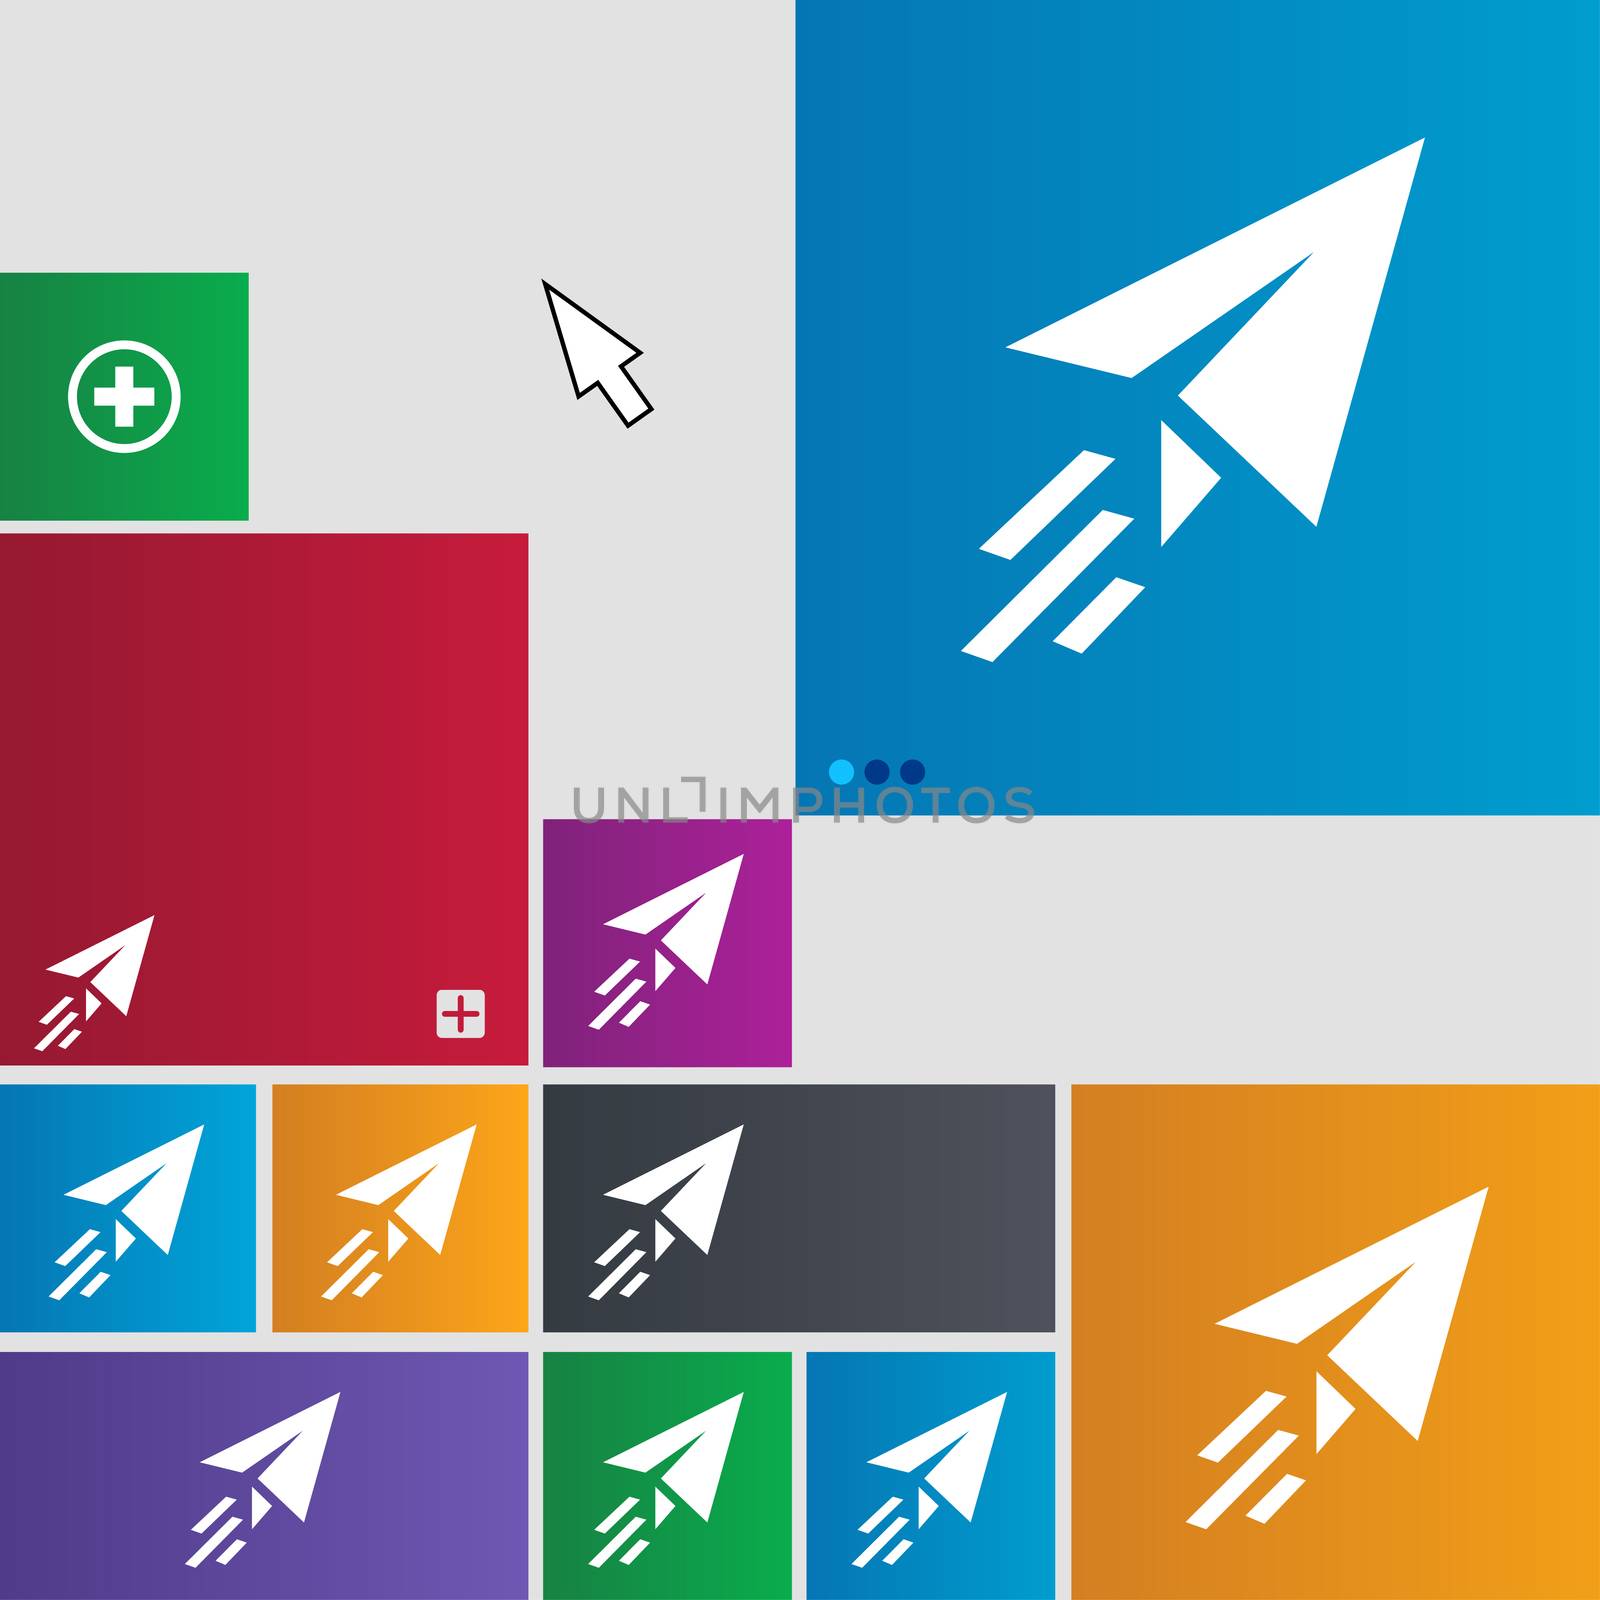 Paper airplane icon sign. buttons. Modern interface website buttons with cursor pointer. illustration